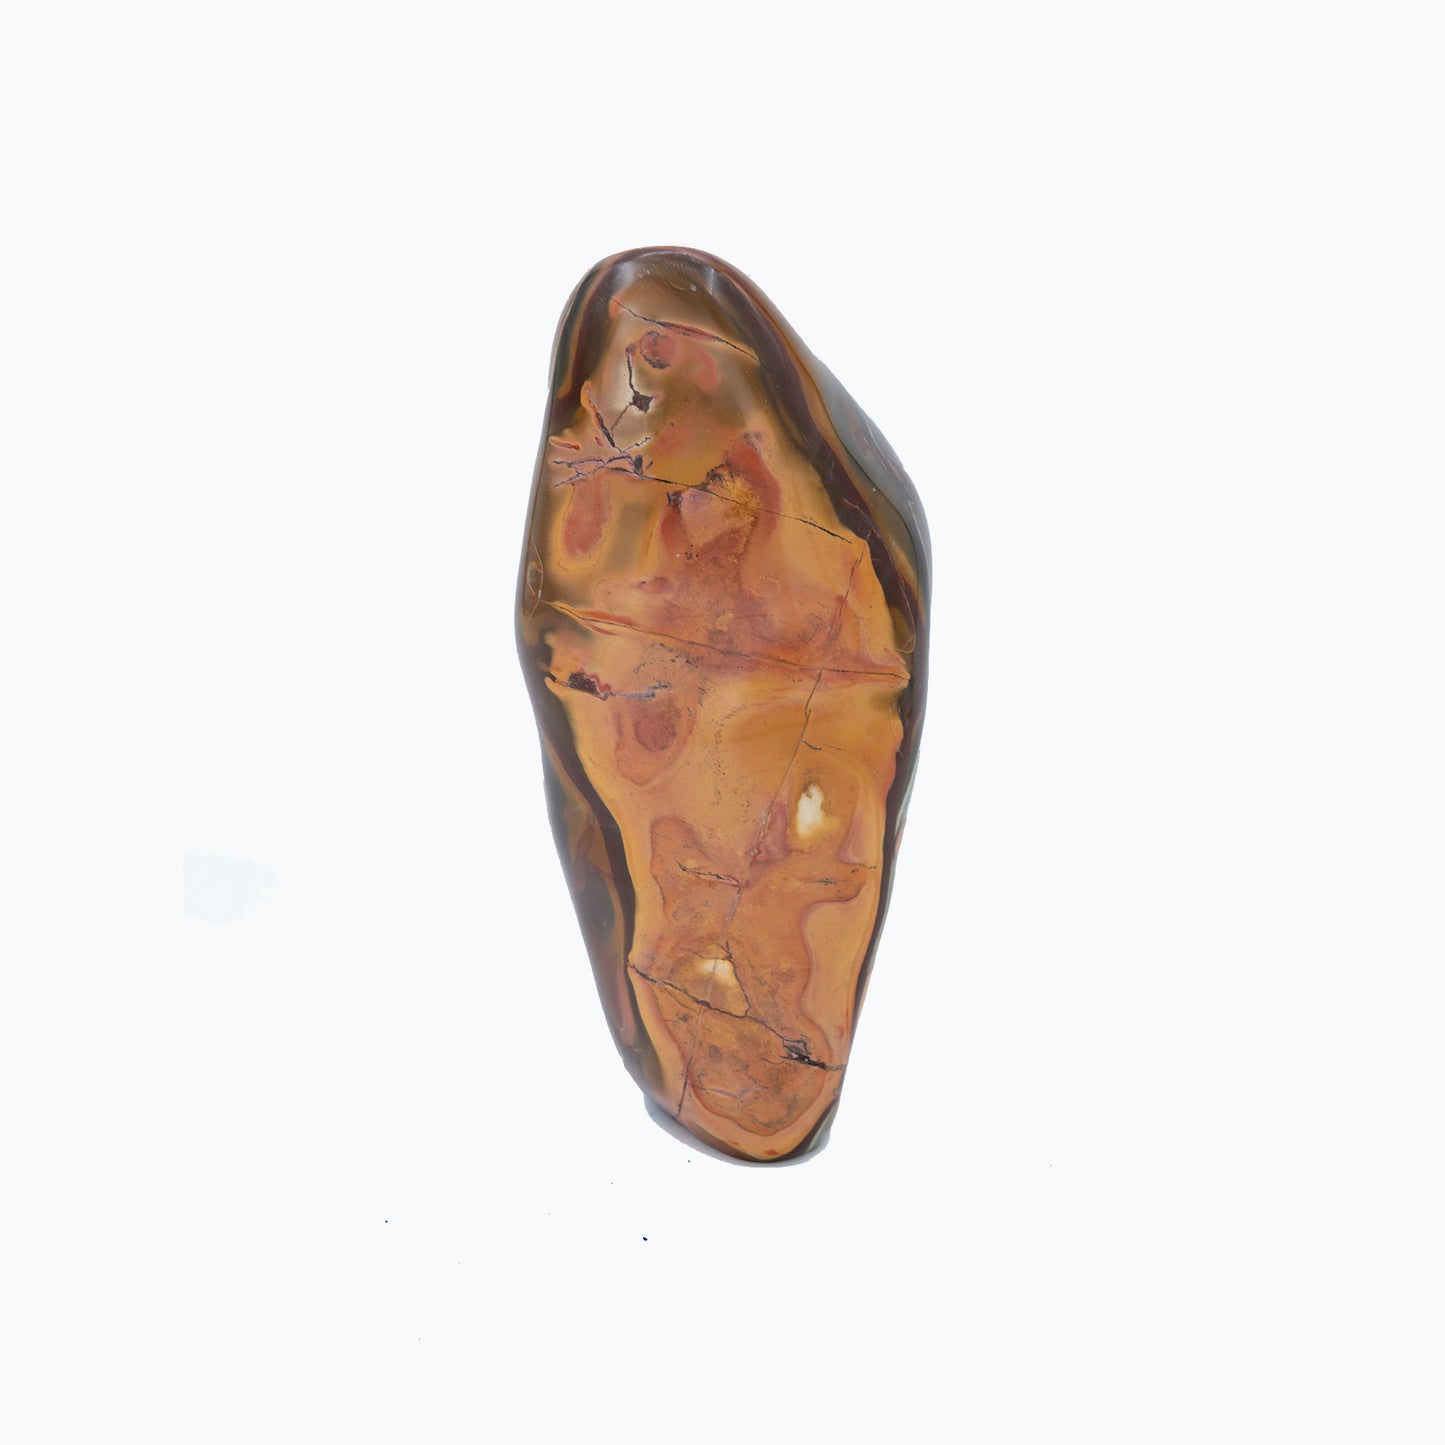 Madagascar Polychrome Jasper.  Beautiful colors and patterns. Size: 9 inches tall and 3 inches wide.  Shamans call this a stone of stability and grounding.